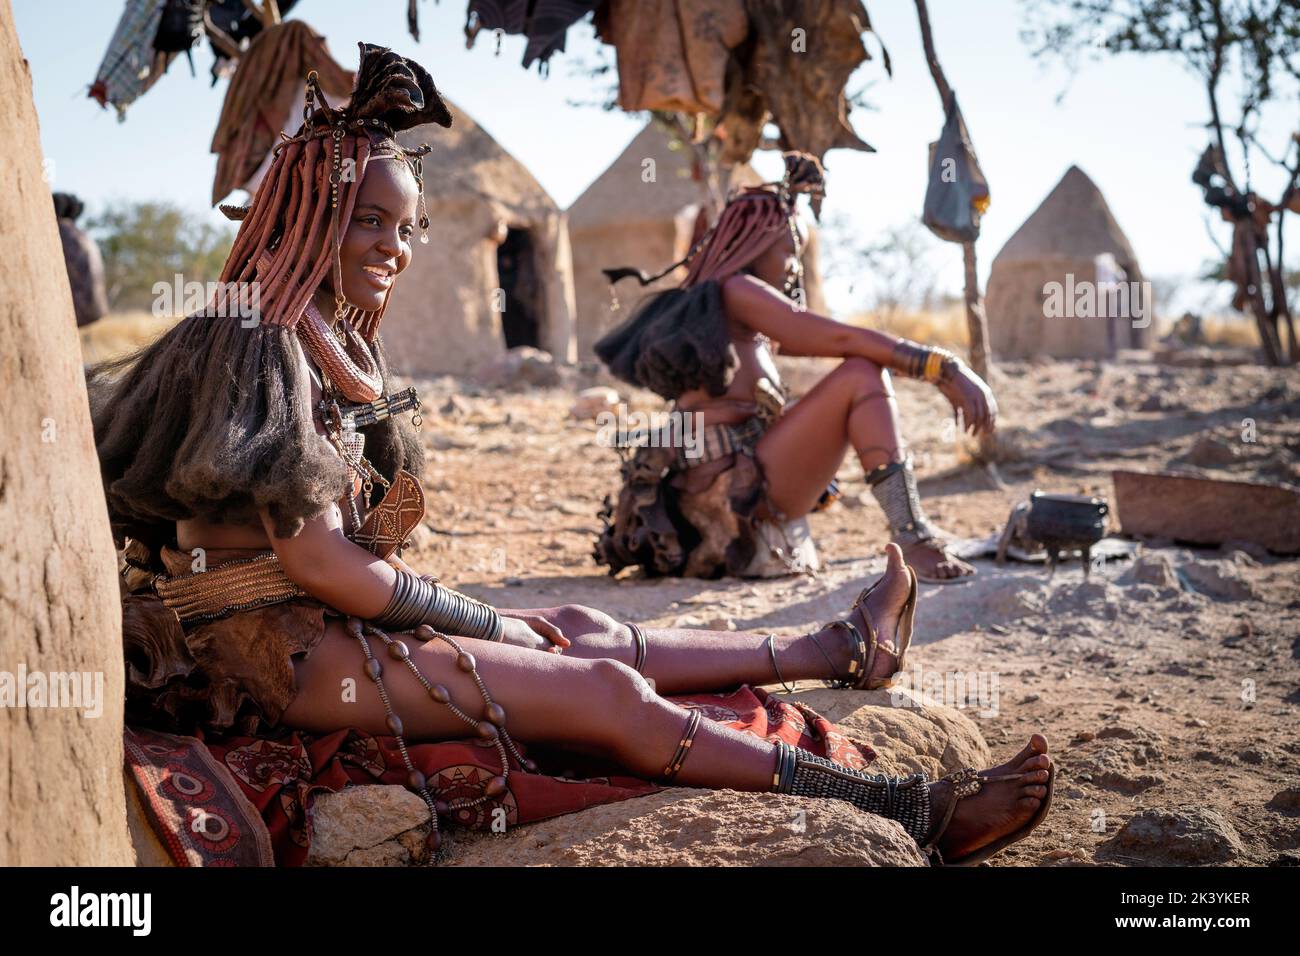 Himba women sitting outside their huts in a traditional Himba village in Namibia, Africa. Stock Photo